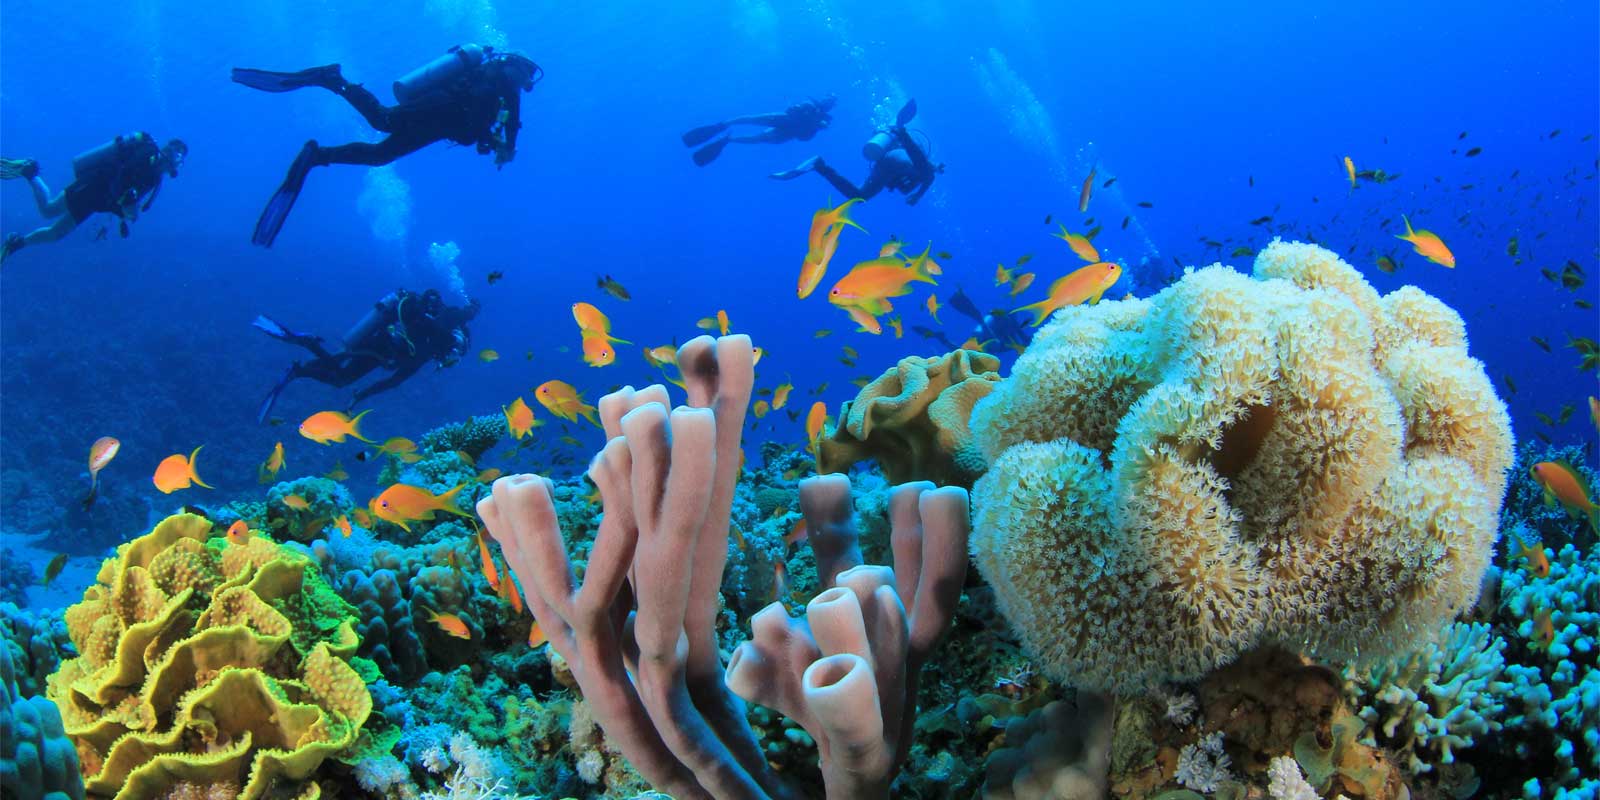 Coral reef and divers in Marsa Alam, Egypt